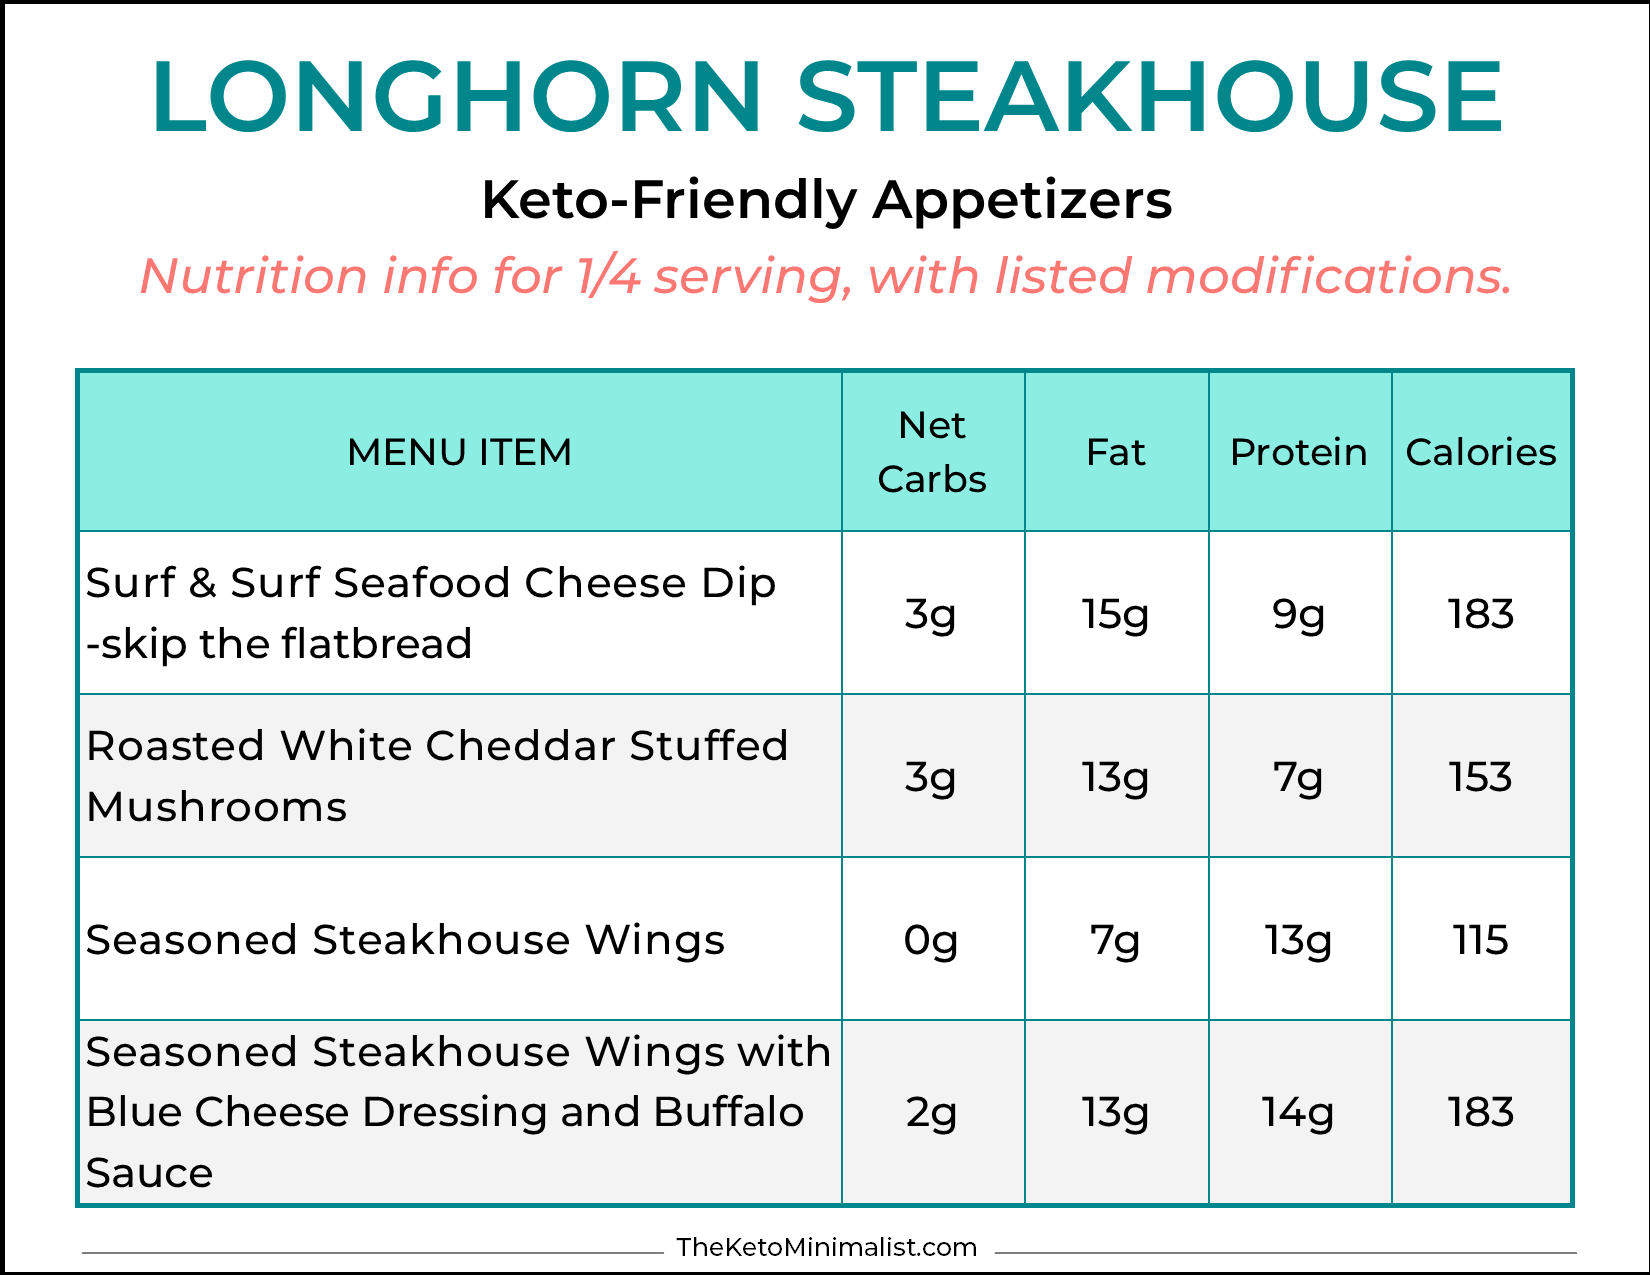 How To Eat Keto At Longhorn Steakhouse